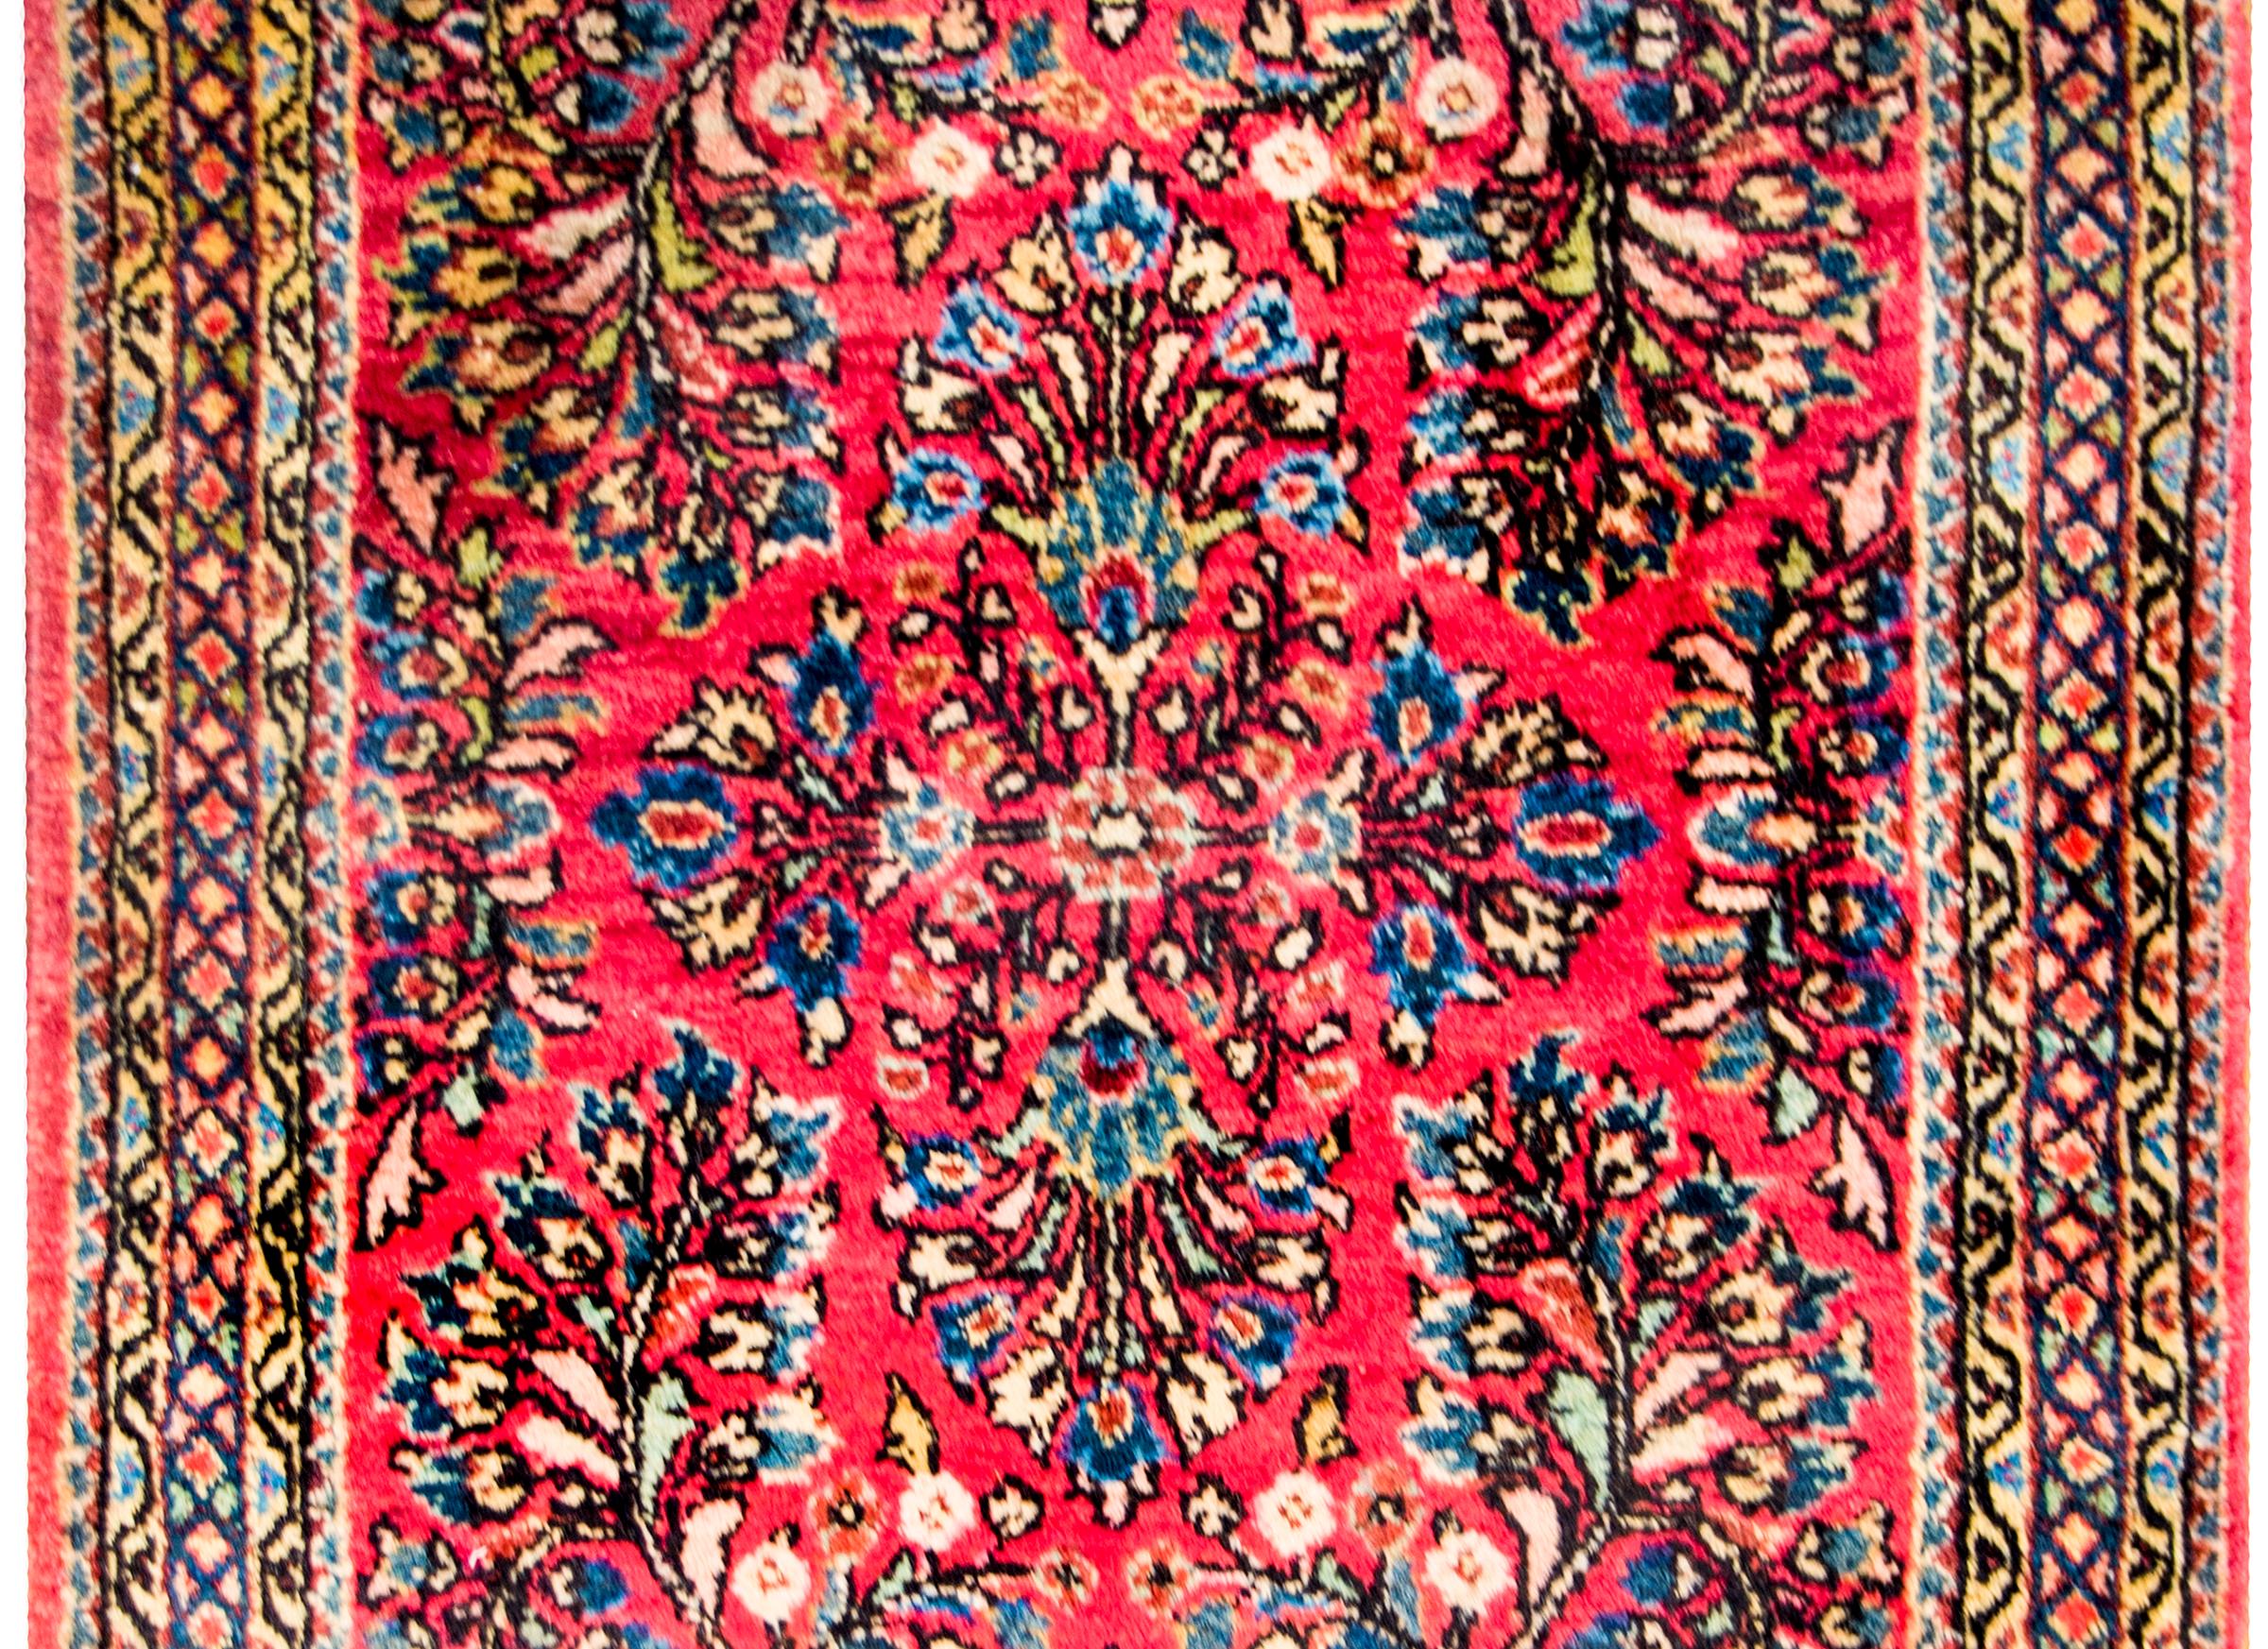 A beautiful early 20th century Persian Sarouk rug with a fantastic mirrored floral and vine pattern, expertly rendered, in light and dark indigo, gold, and brown, on a bold cranberry background. The border is wide, with multiple petite floral